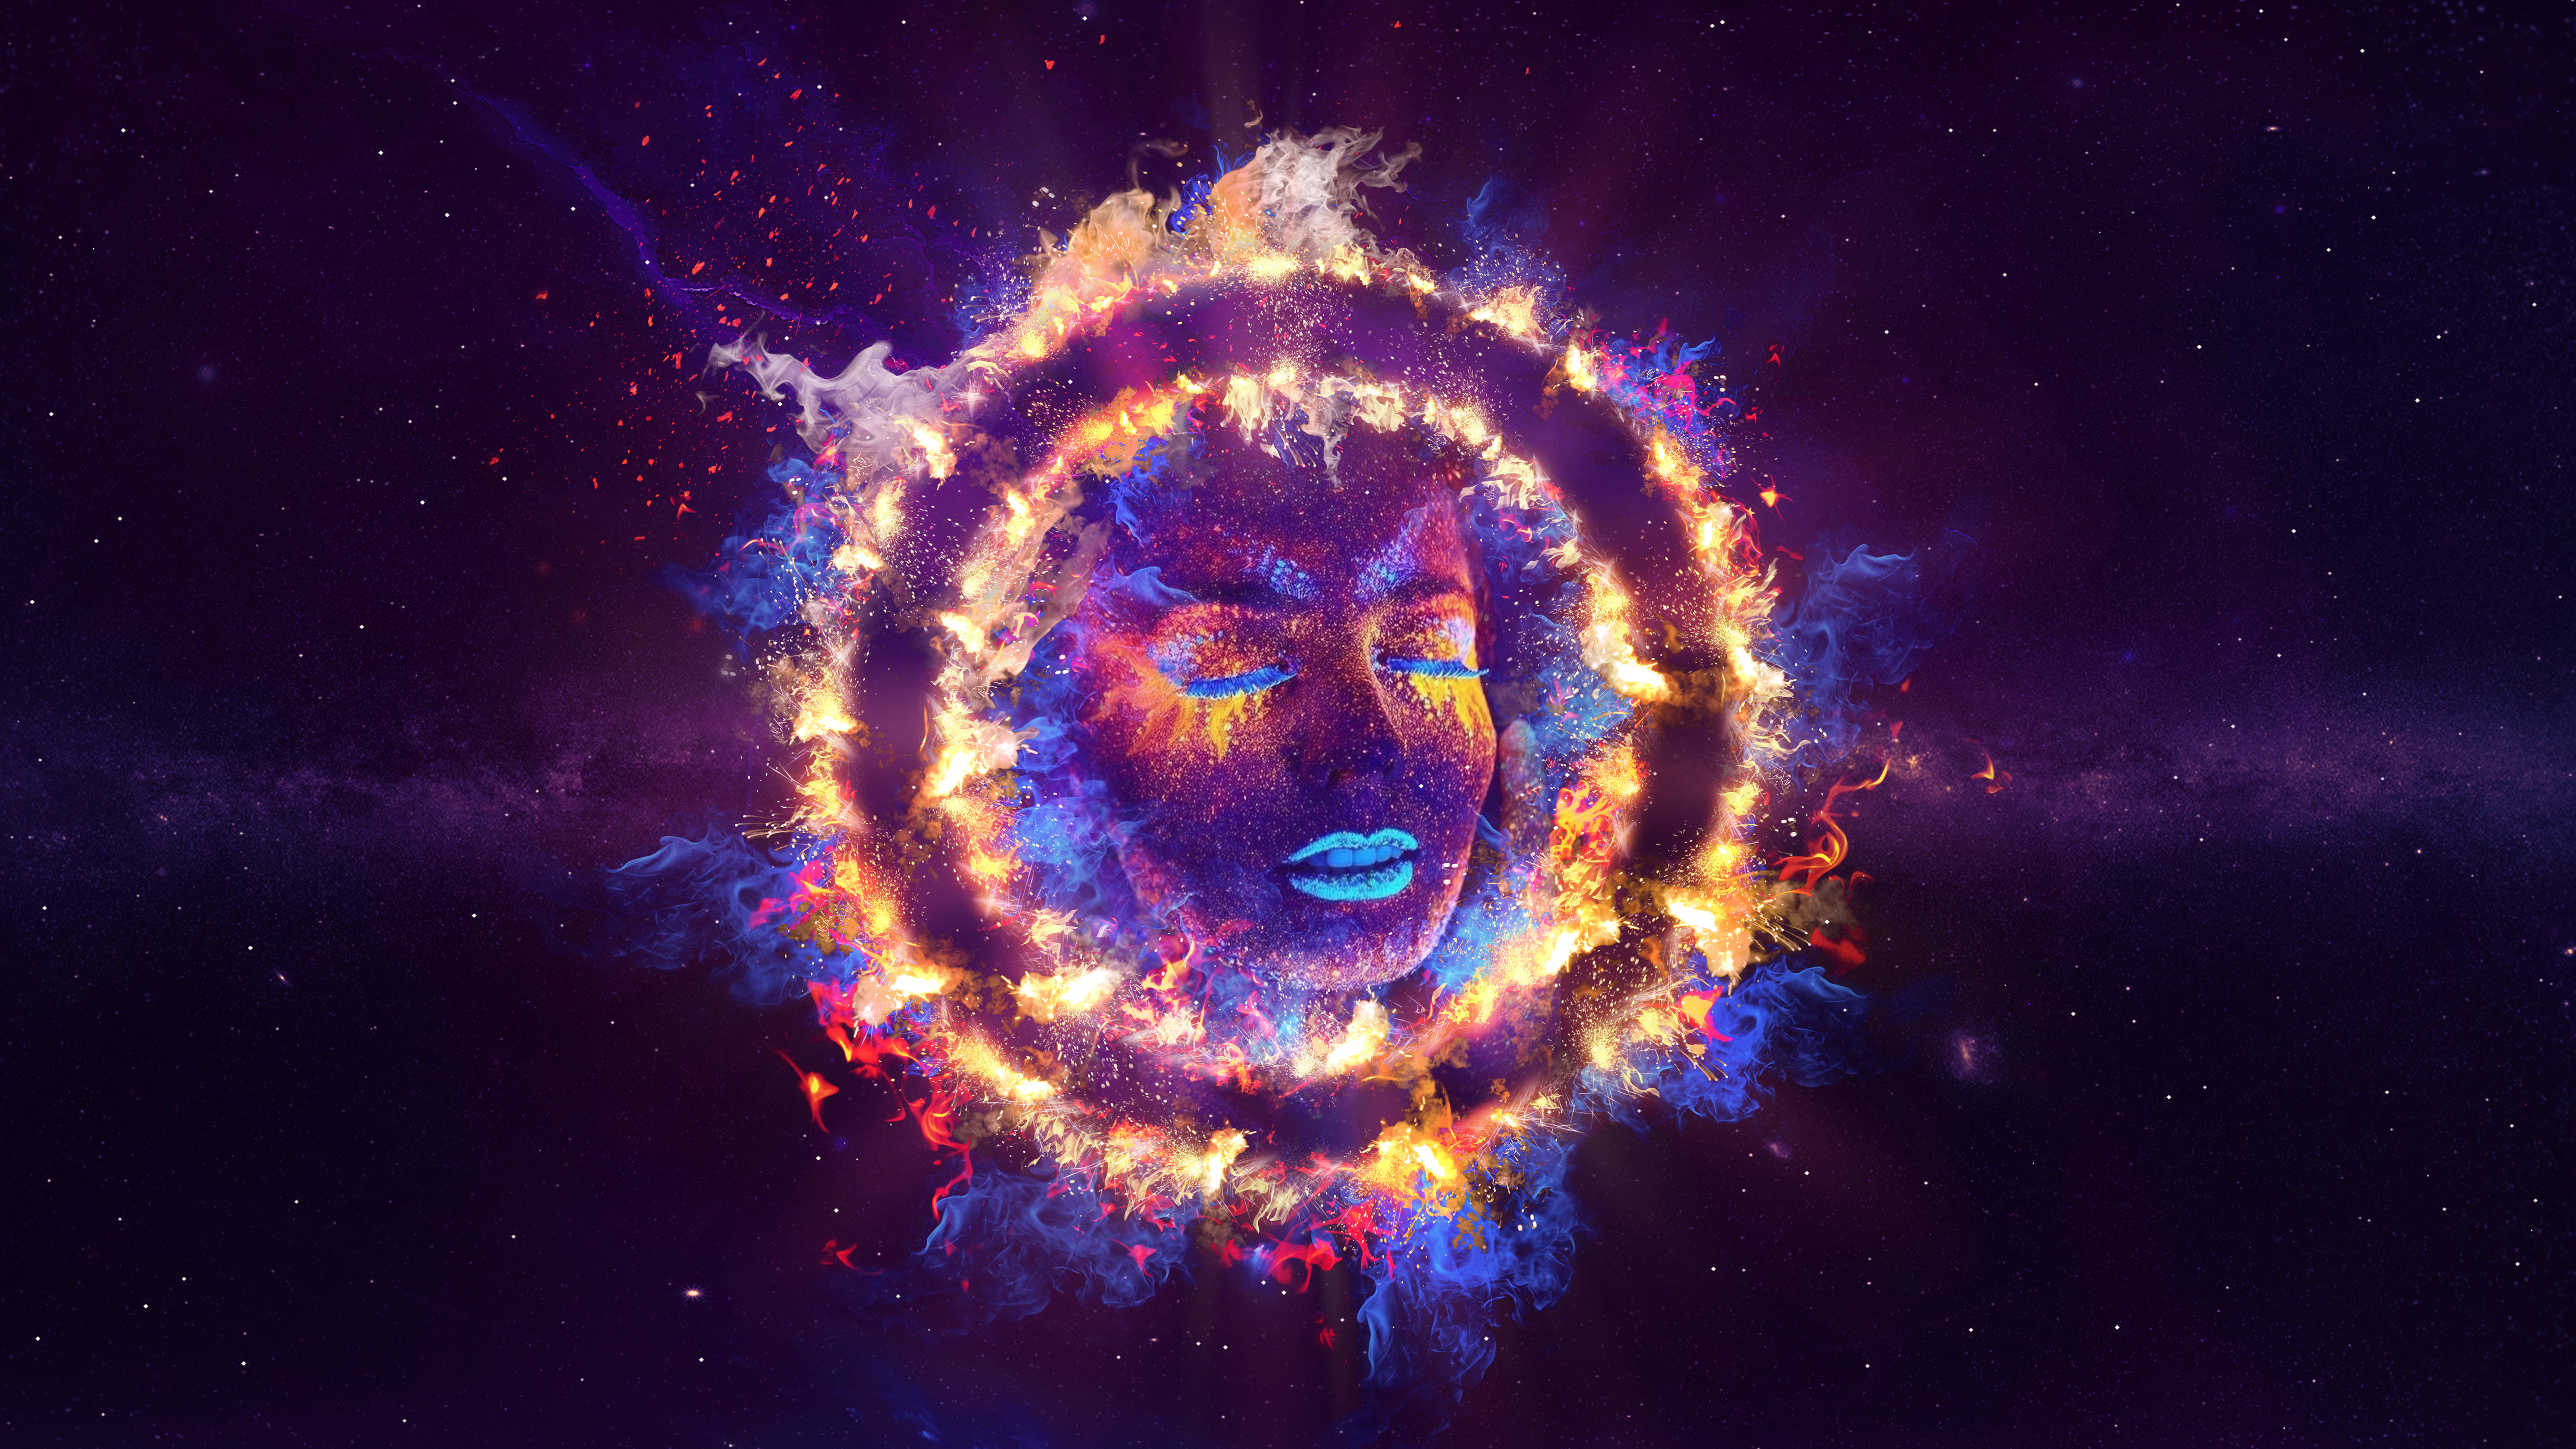 Women Closed Eyes Fire Neon Galaxy Art 5k, HD Artist, 4k Wallpaper, Image, Background, Photo and Picture